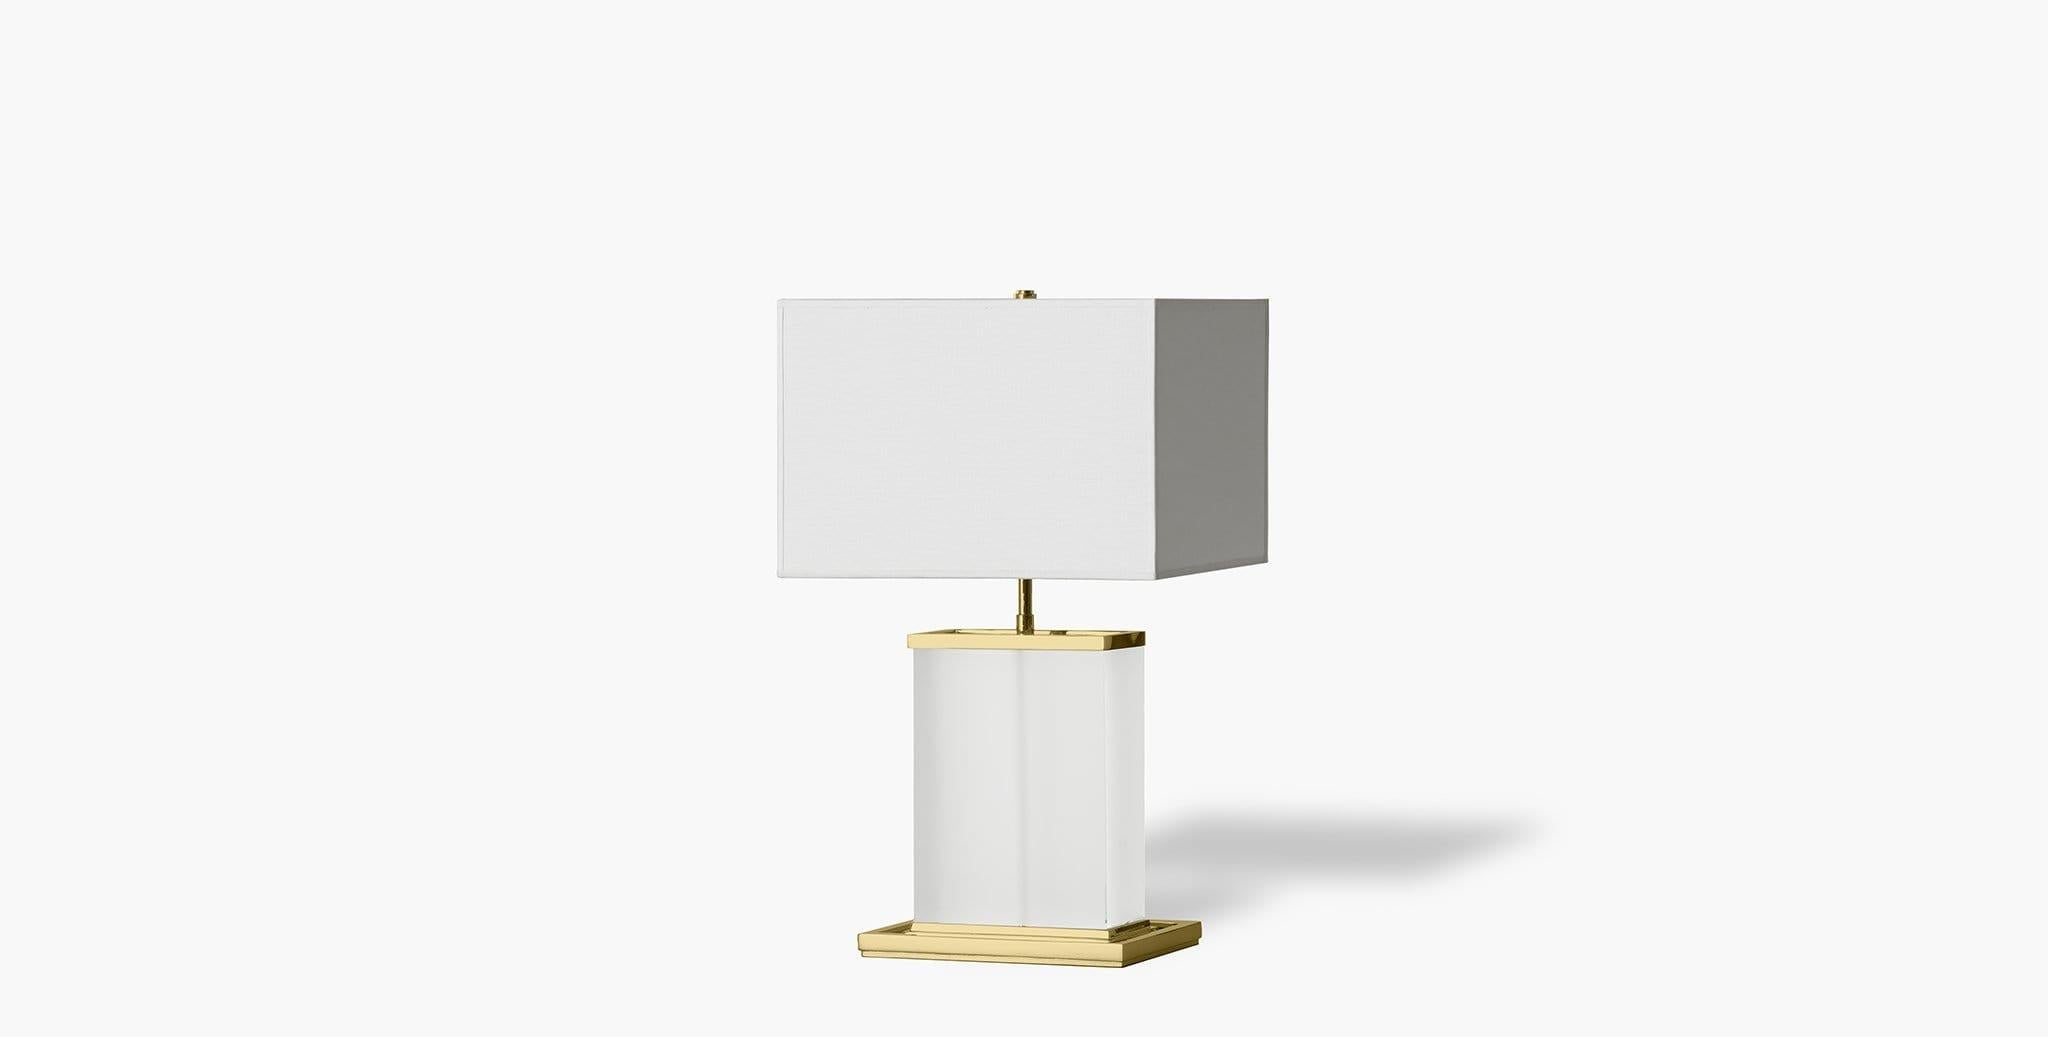 The Brier Table Lamp radiates a soft, luminous glow that is balanced by the tones of its shade and base. Our handcrafted fabrics, leathers, and finishes are inspired by the natural variations within fibers, textures, and weaves. Each selection is